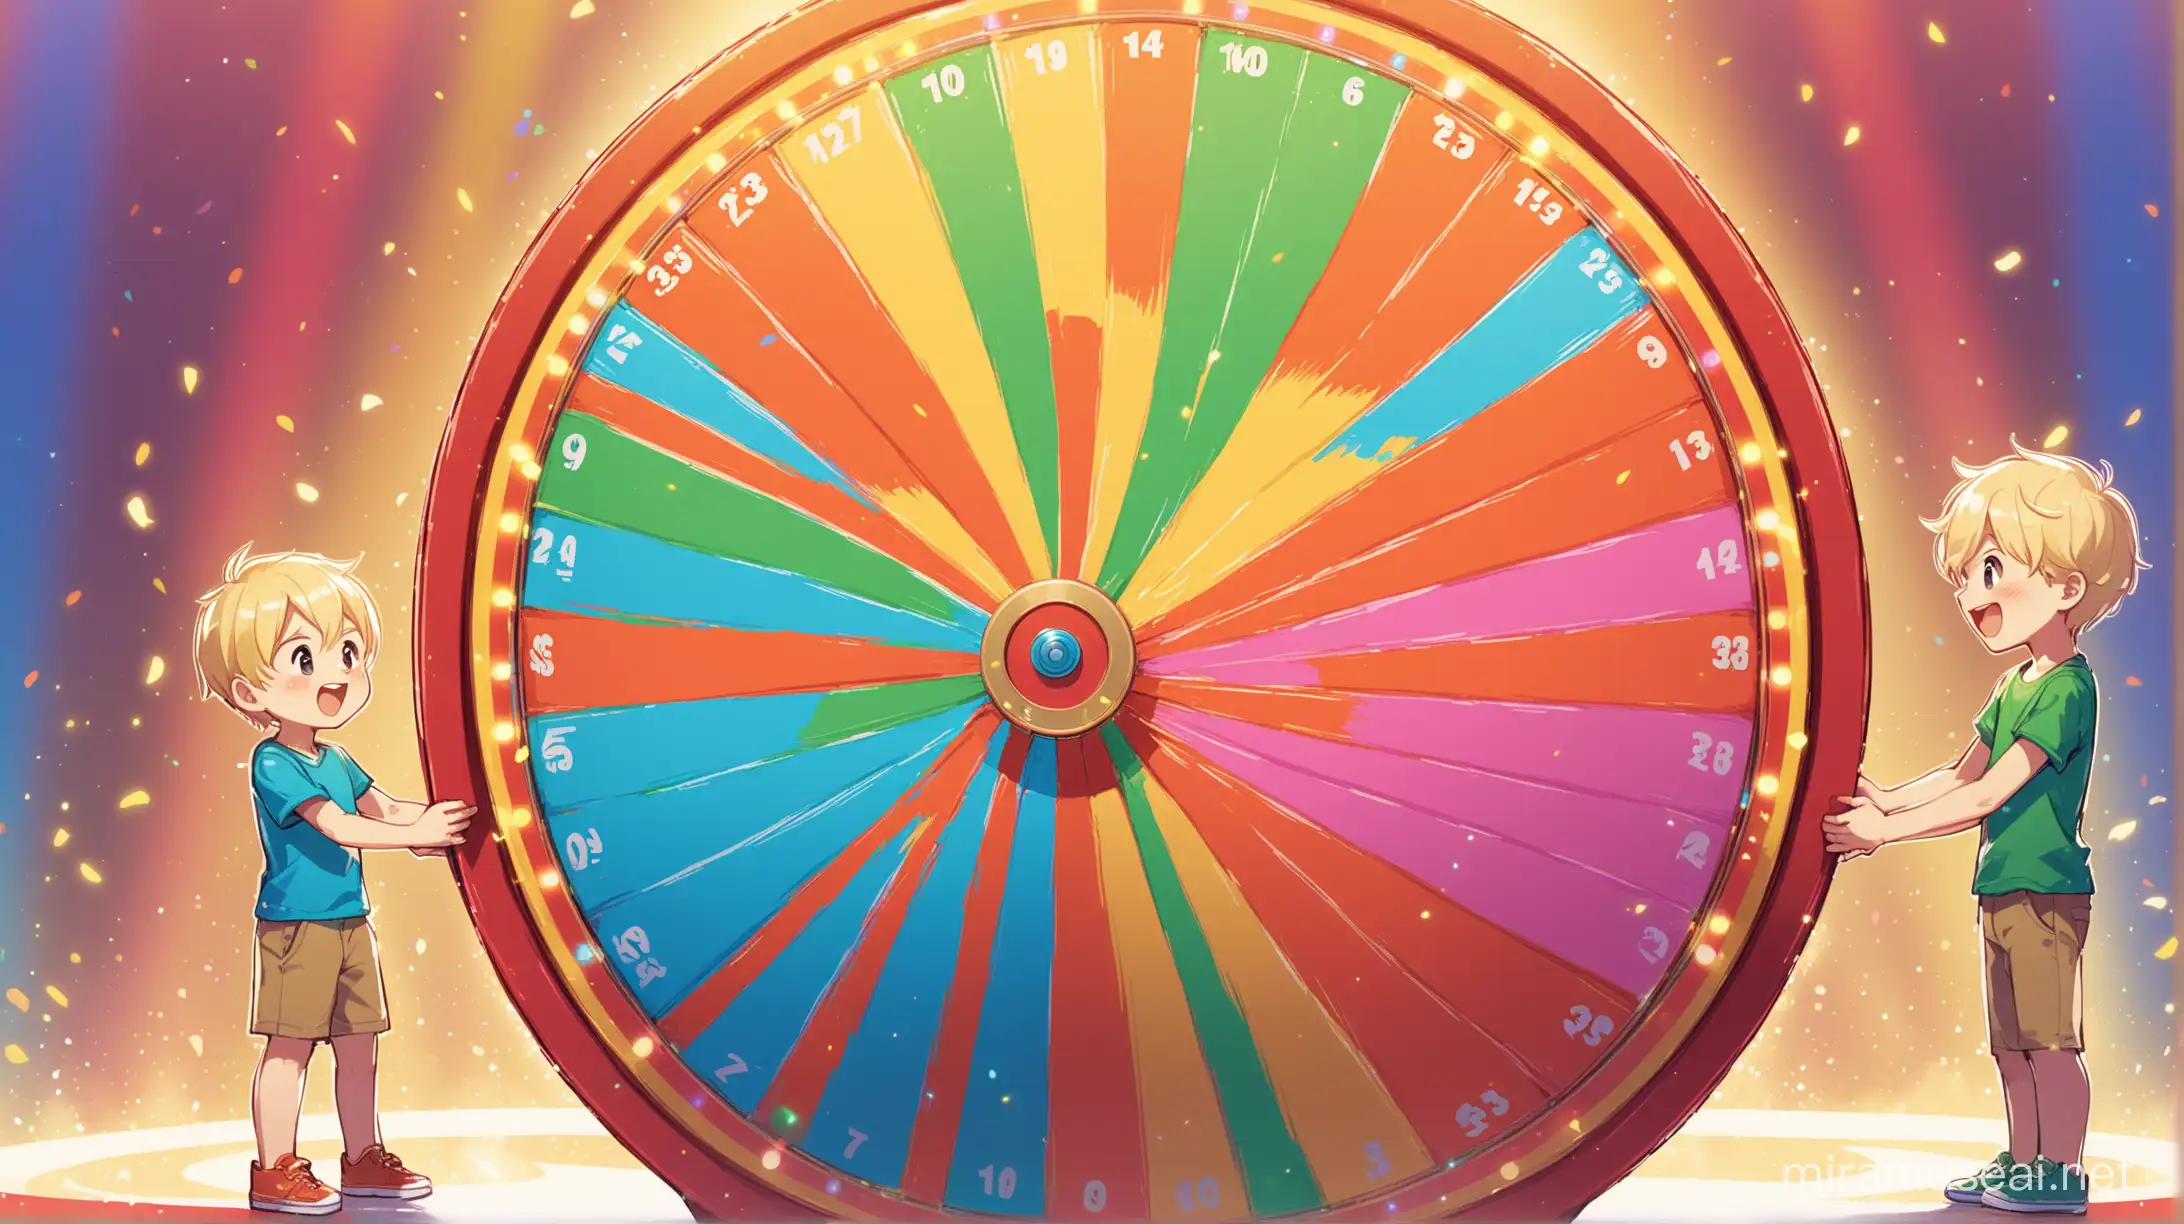 Two blonde boys spinning a giant prize wheel.